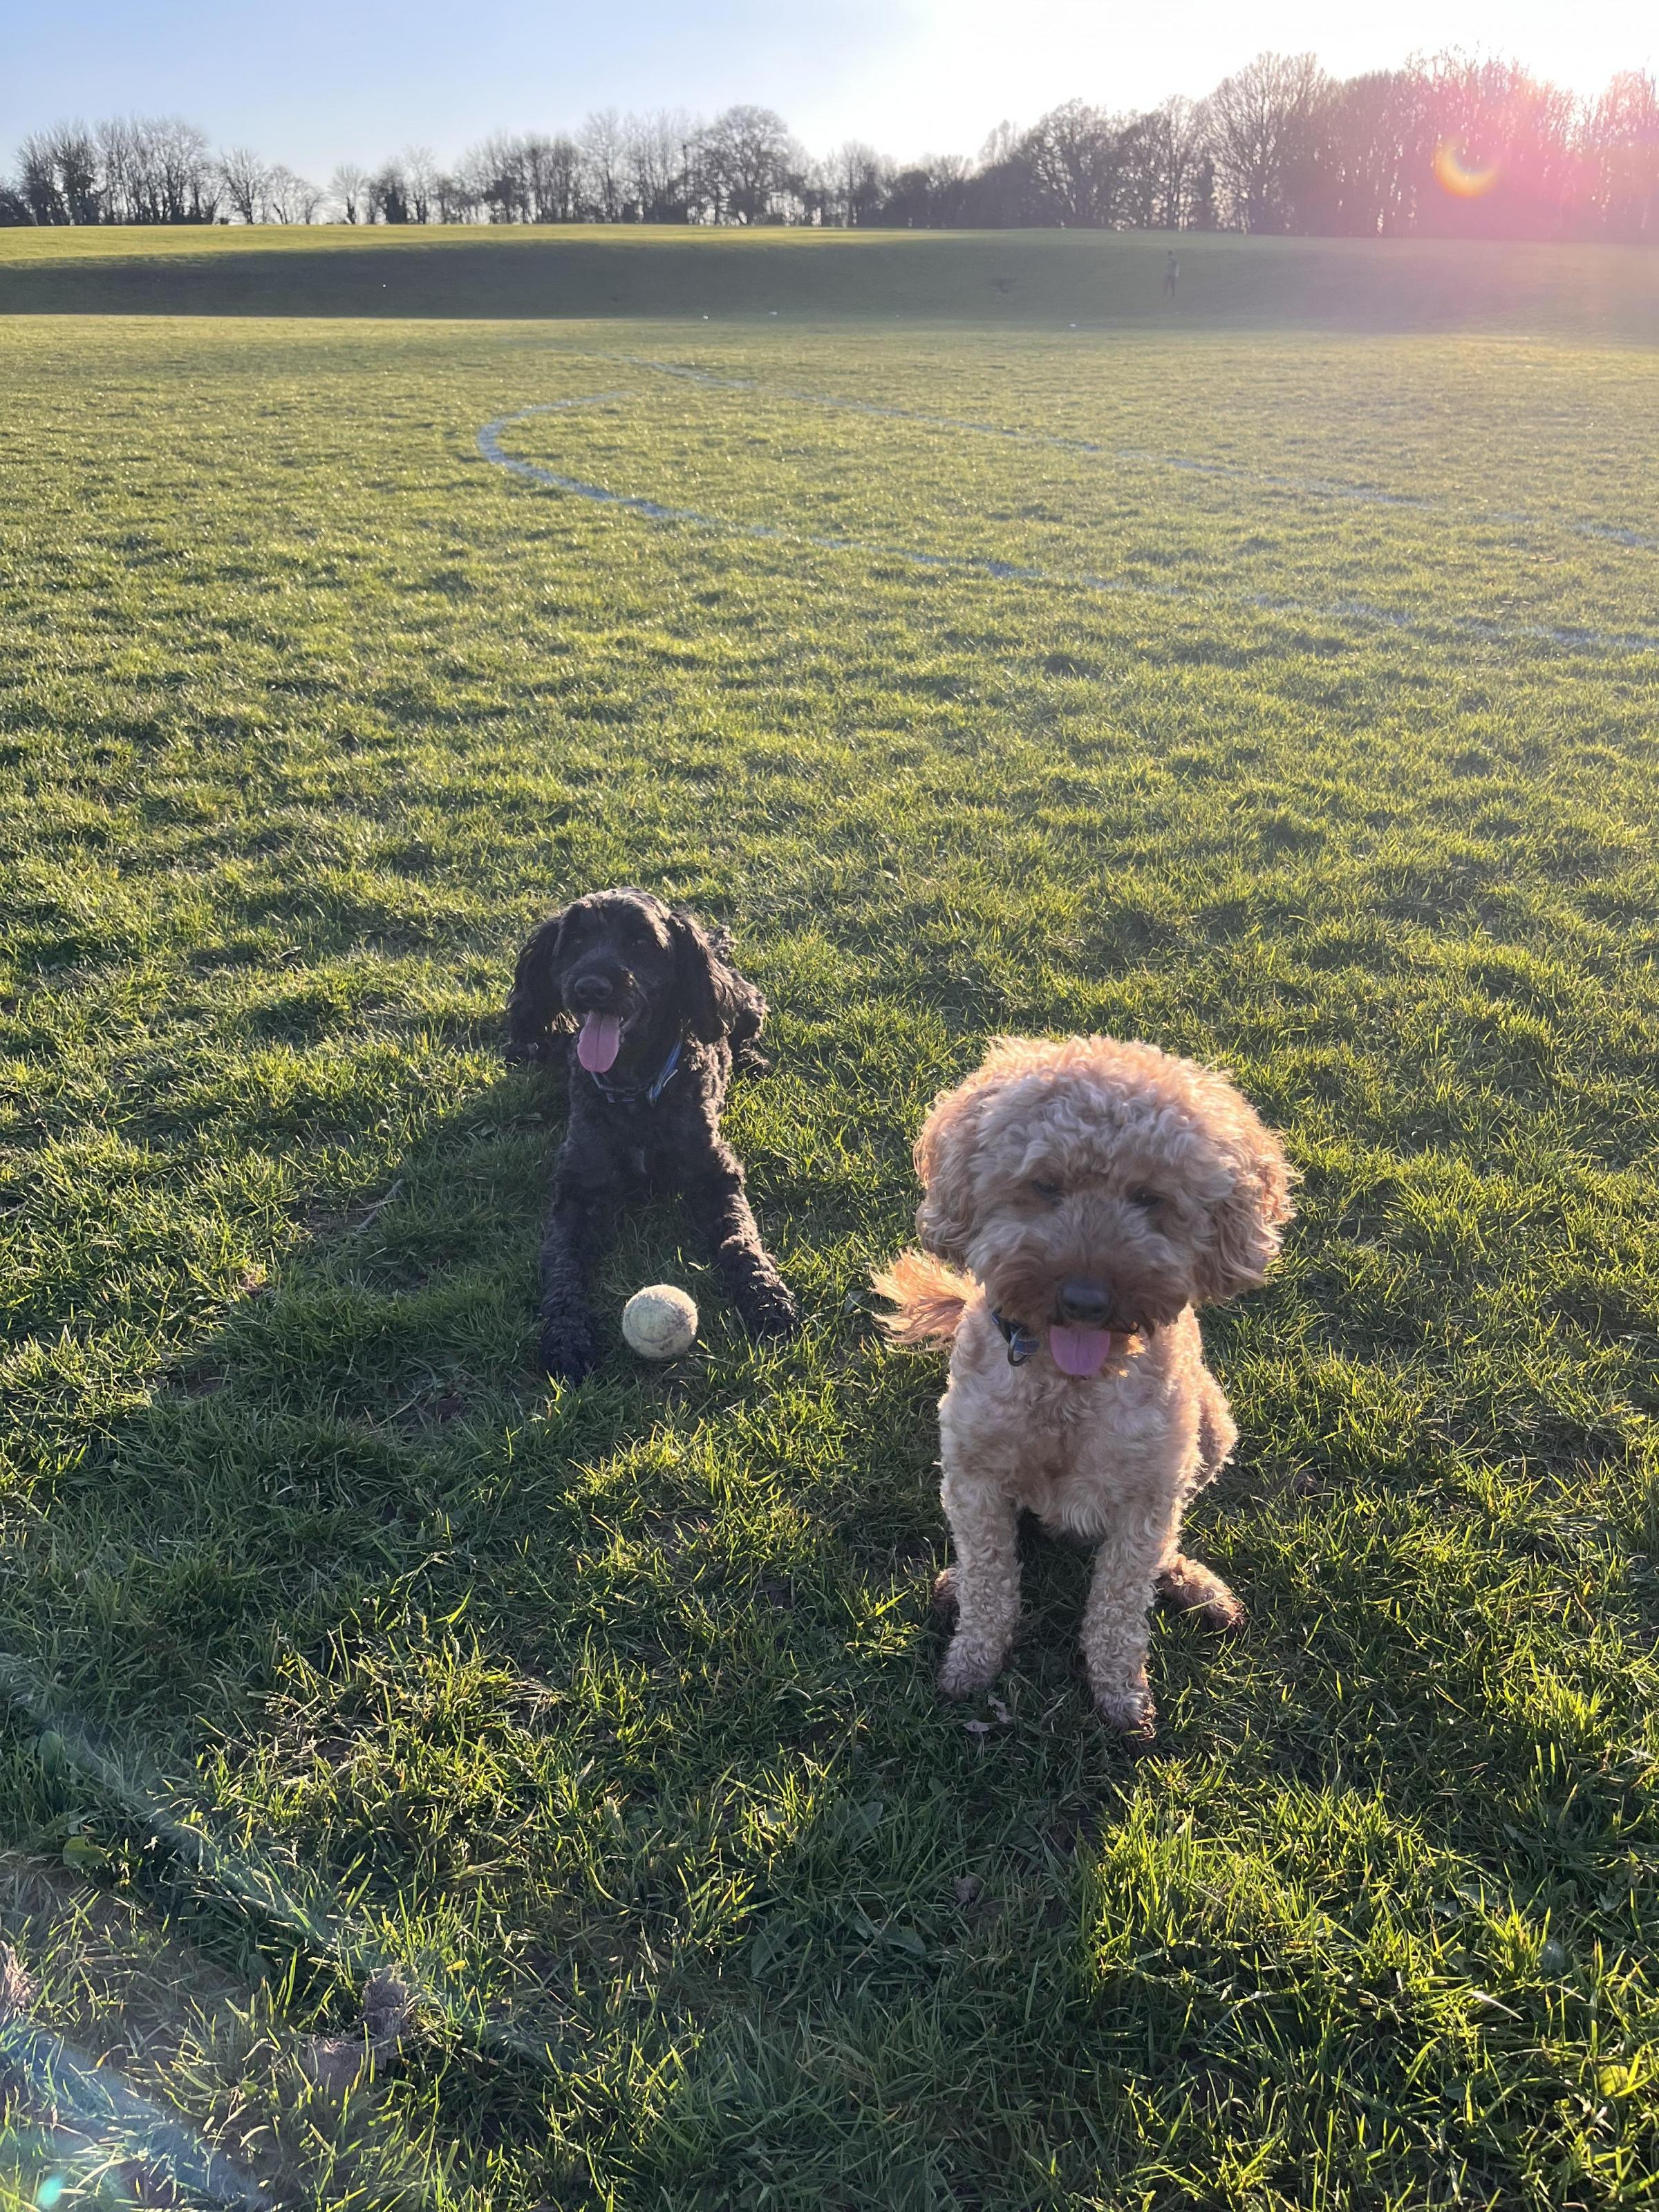 Hereford Times: Teddy and chase having a rest after there walk whilst the sun is setting.